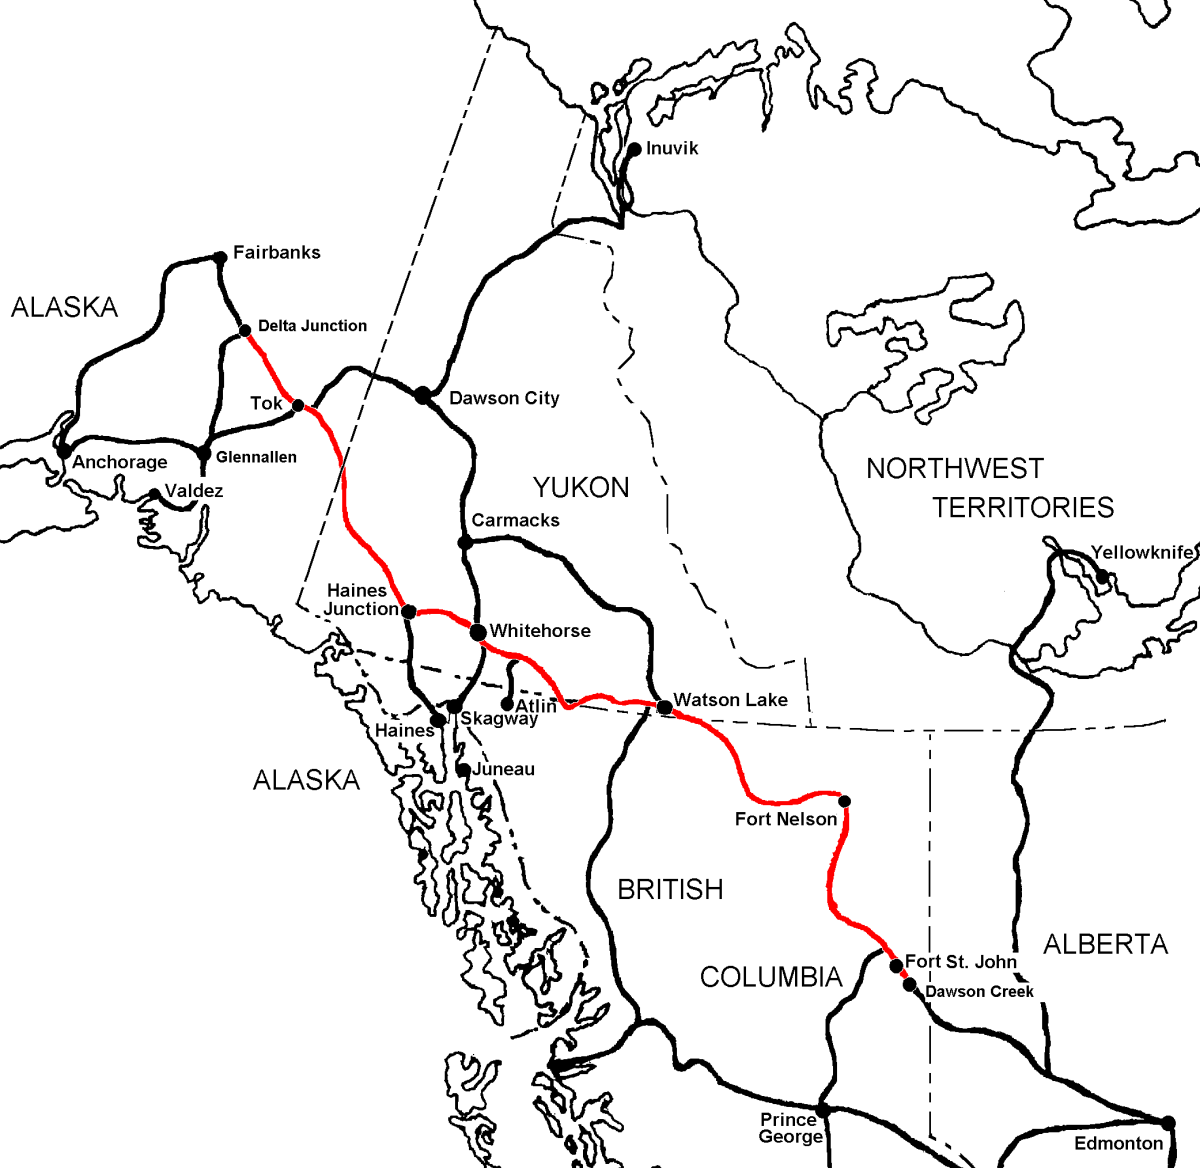 Ten Things to Know About Driving the Alaska Highway